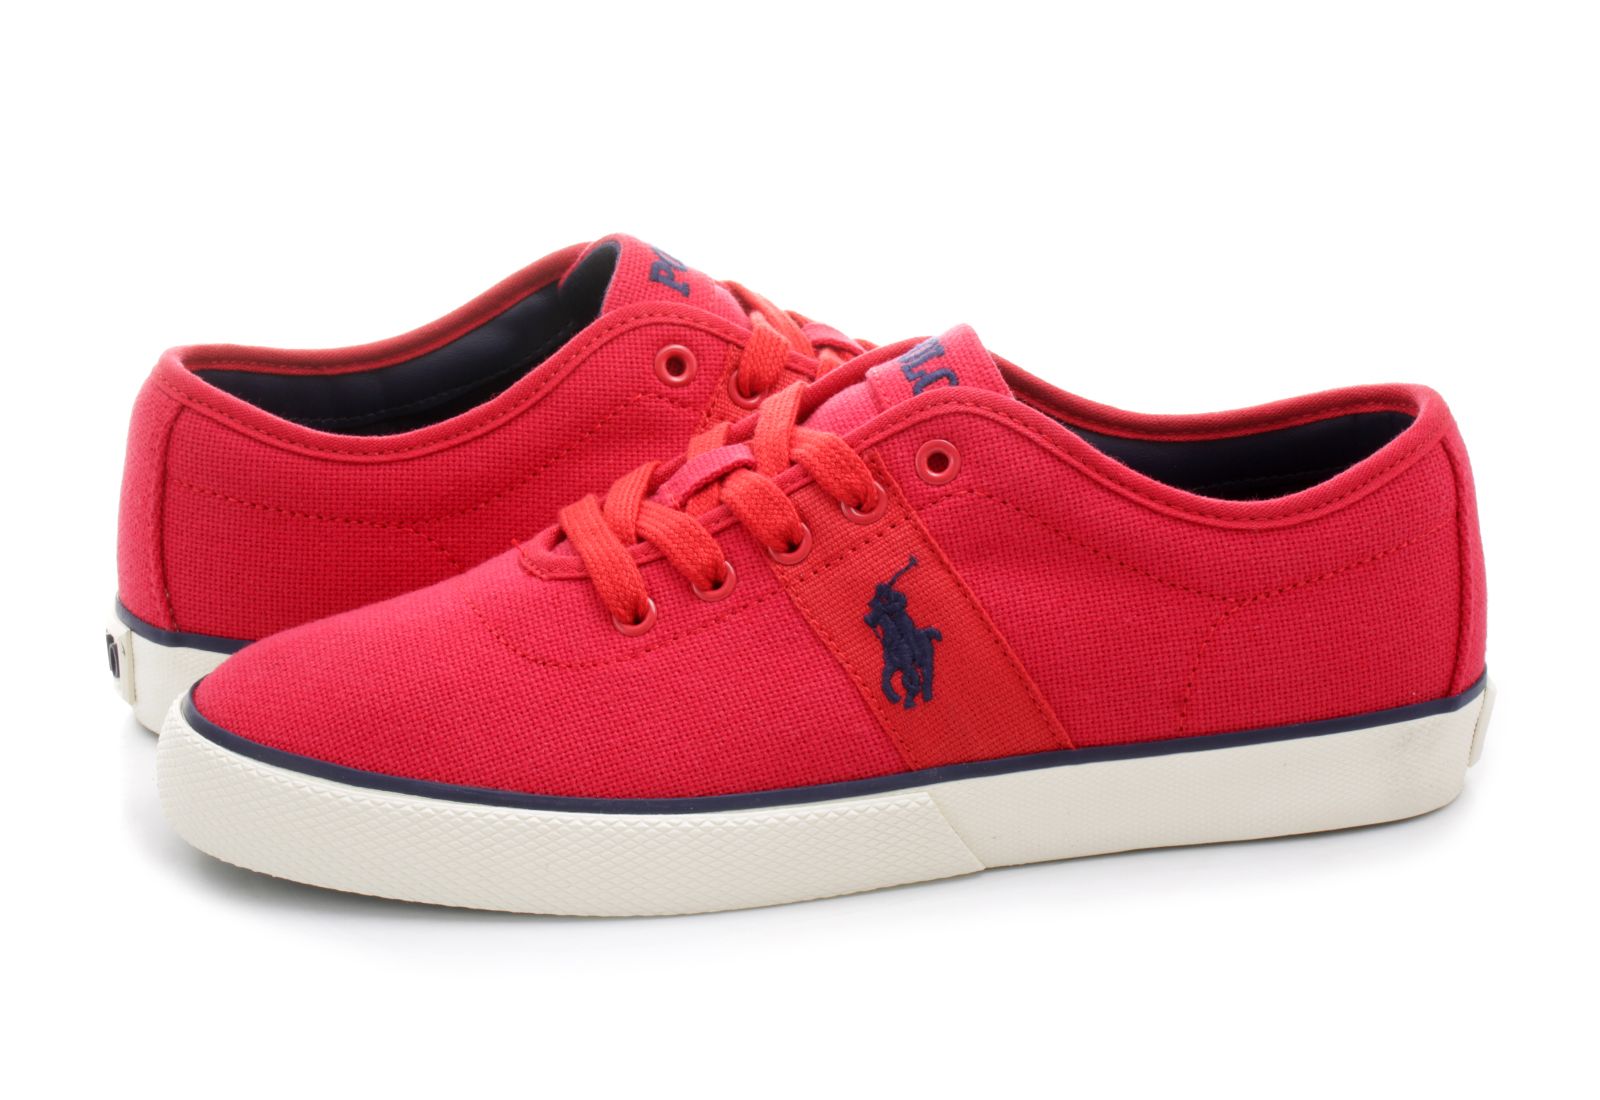 Polo Ralph Lauren Shoes - Halford-ne - 816641861003 - Online shop for  sneakers, shoes and boots